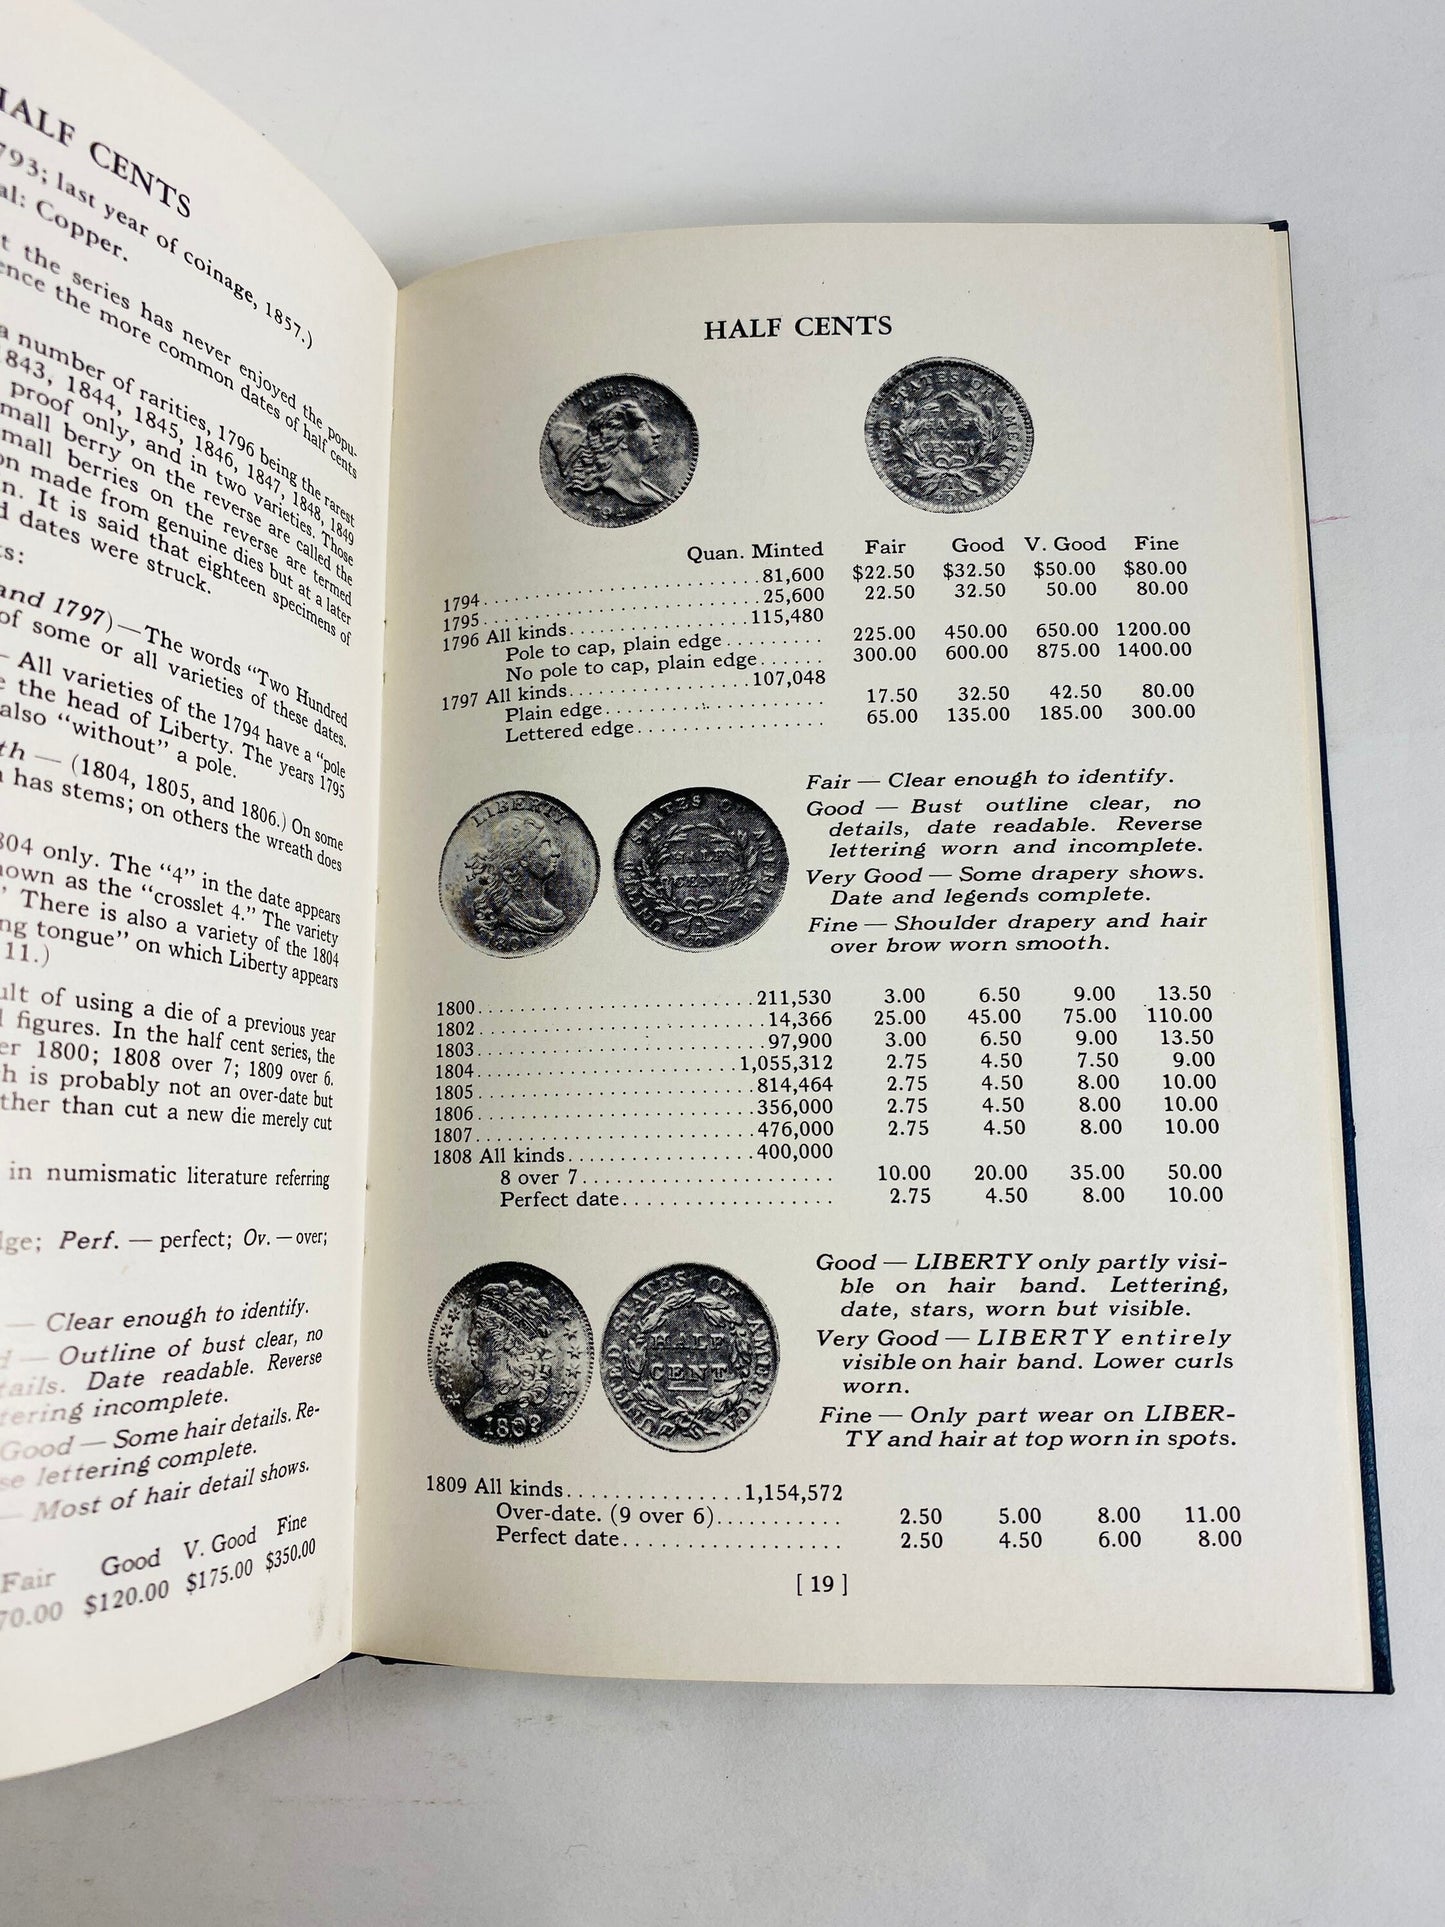 1967 Handbook of United States Coins with Premium List Numismatic vintage book collector reference History & distinguishing marks Yeoman